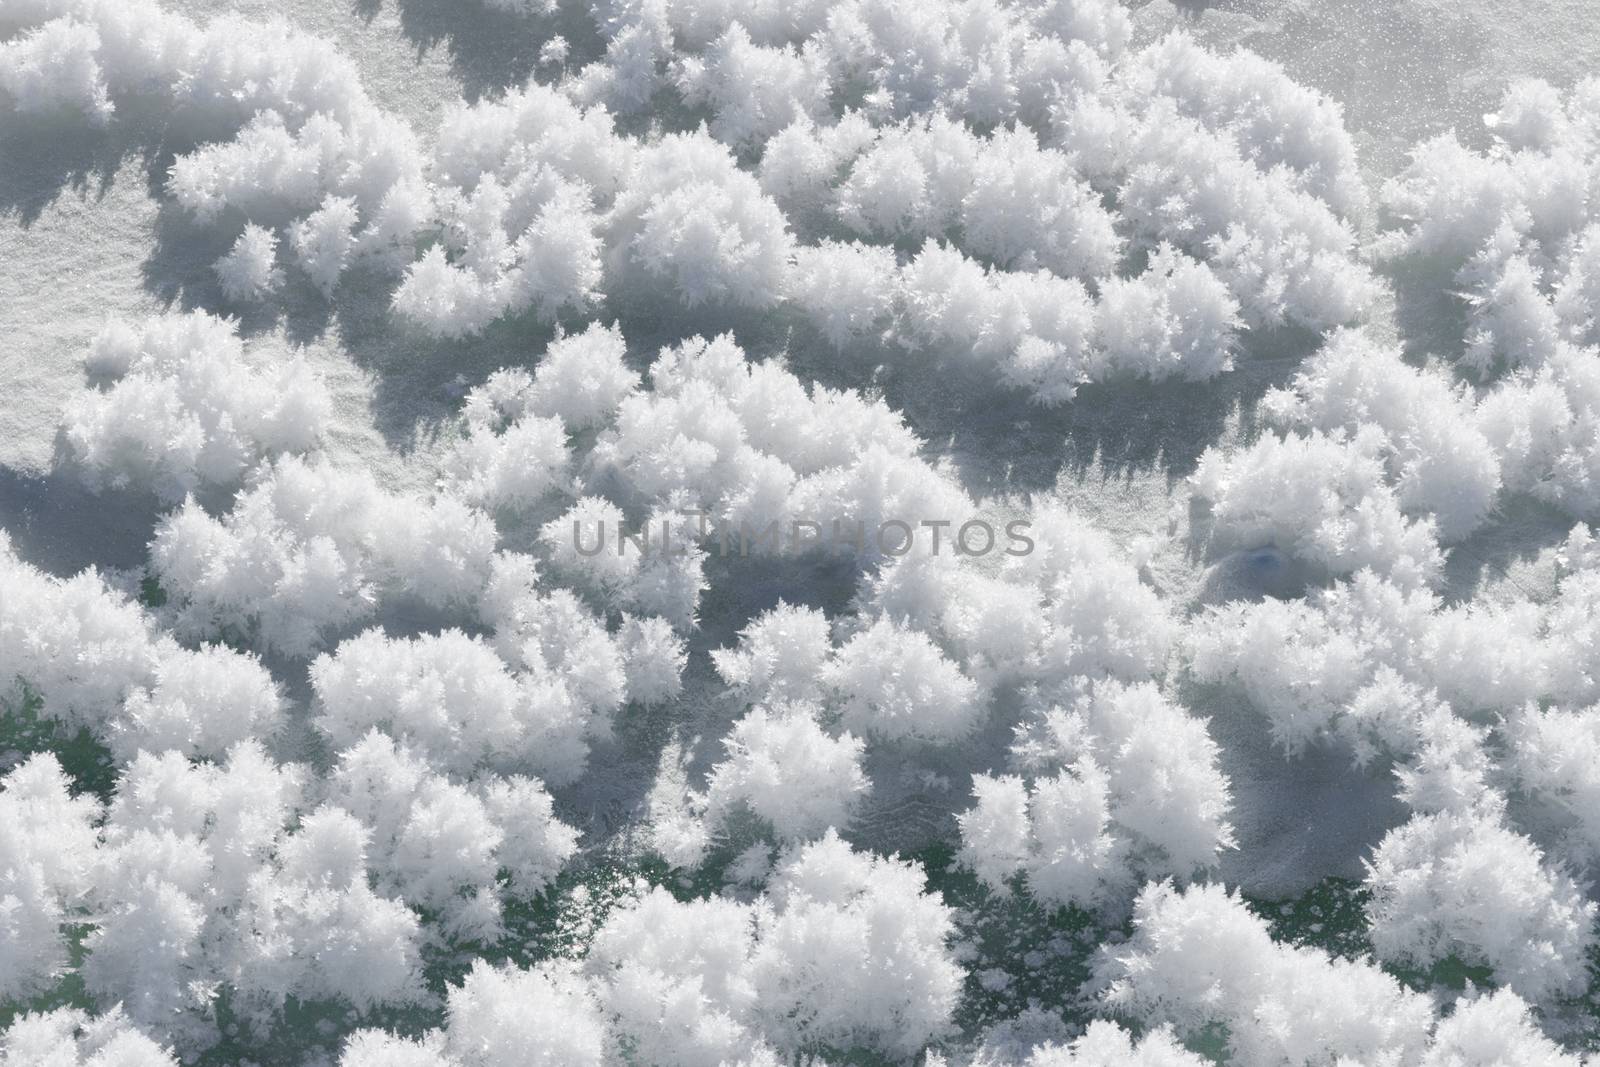 Snow hoar-frost ice crystal clusters on snow surface nature background pattern texture